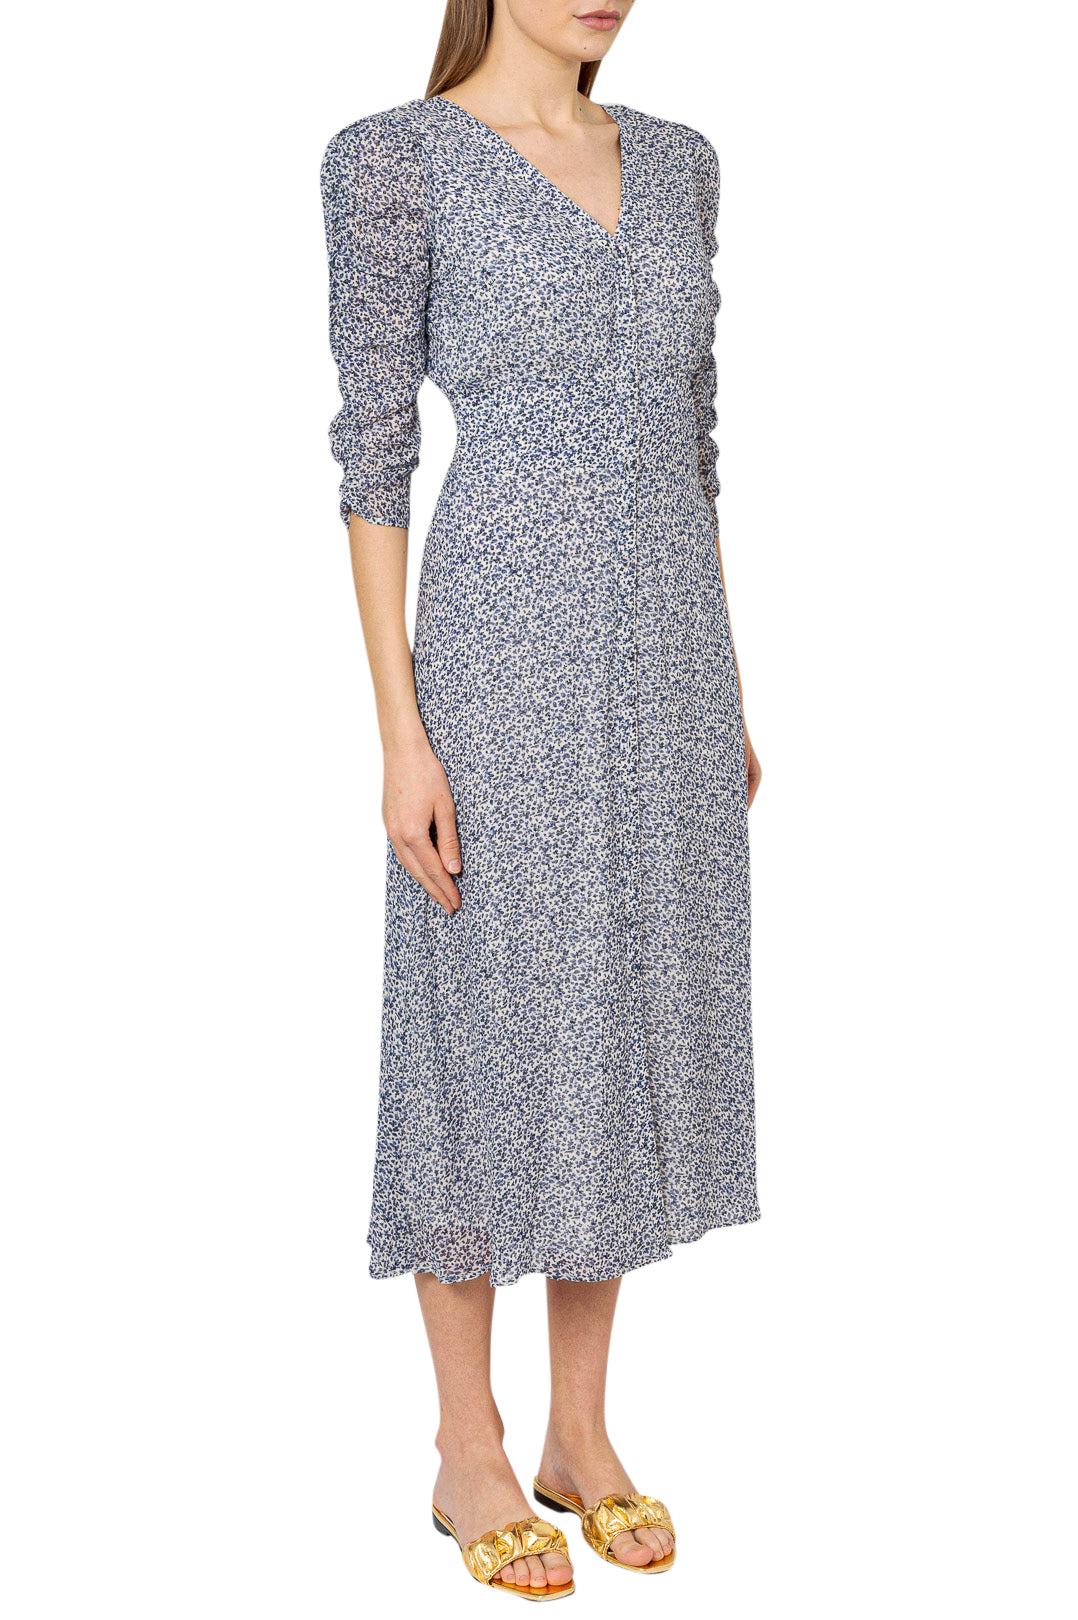 By Timo-Floral pattern long dress-2120523-dgallerystore